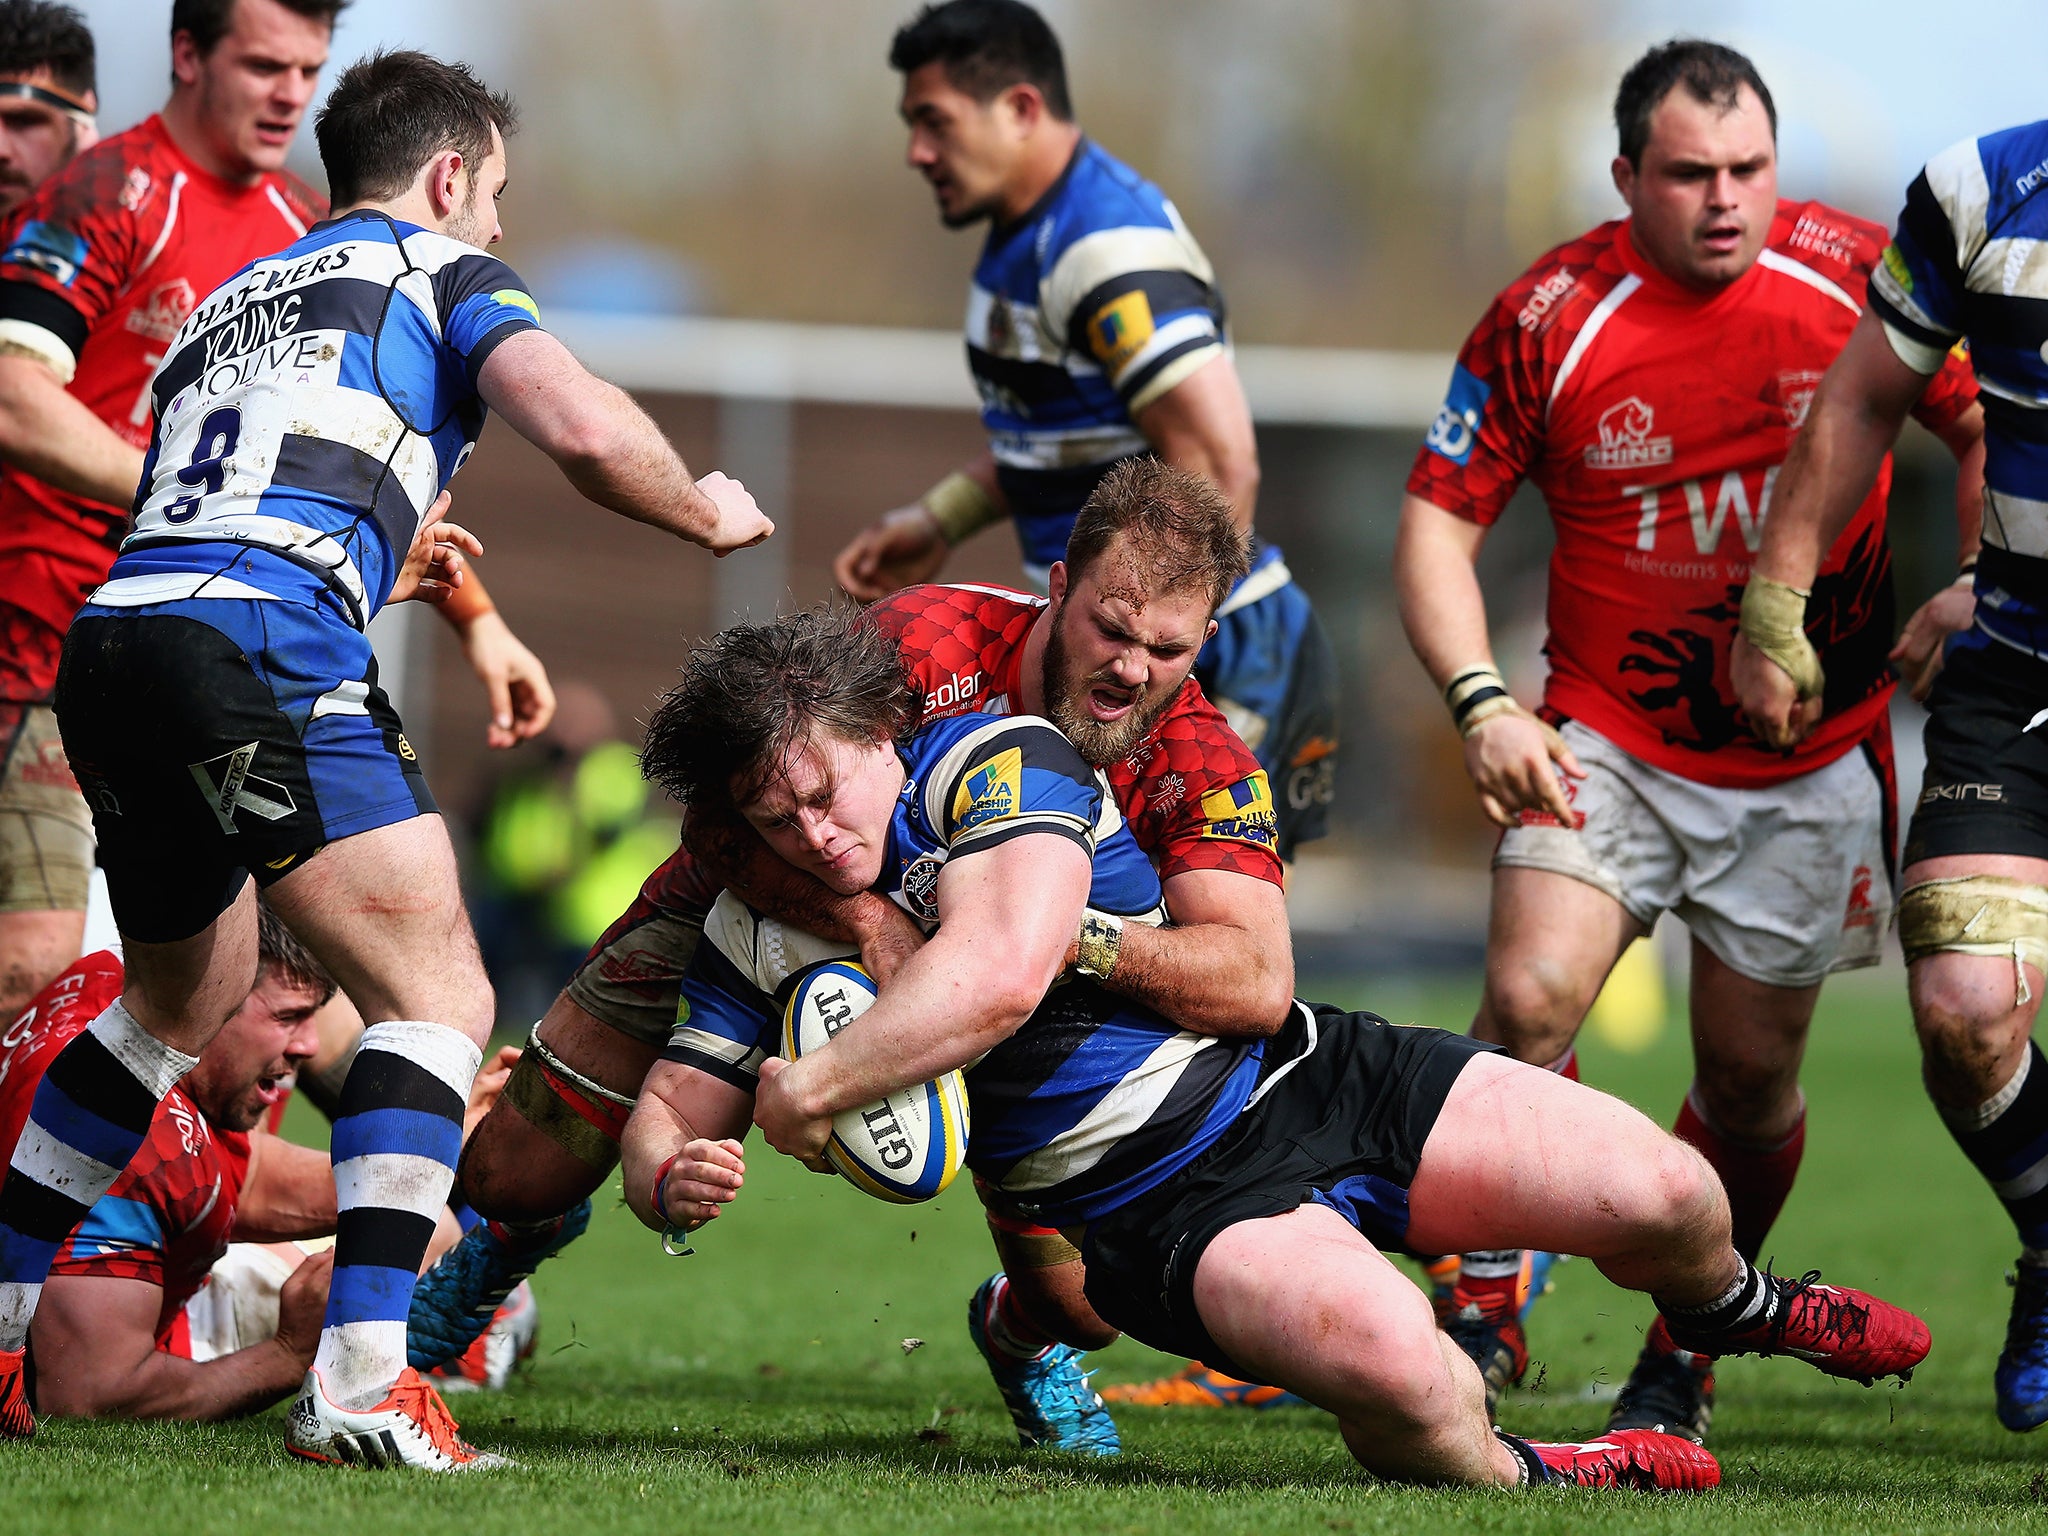 Nick Auterac of Bath is tackled by Lachlan McCaffrey of London Welsh